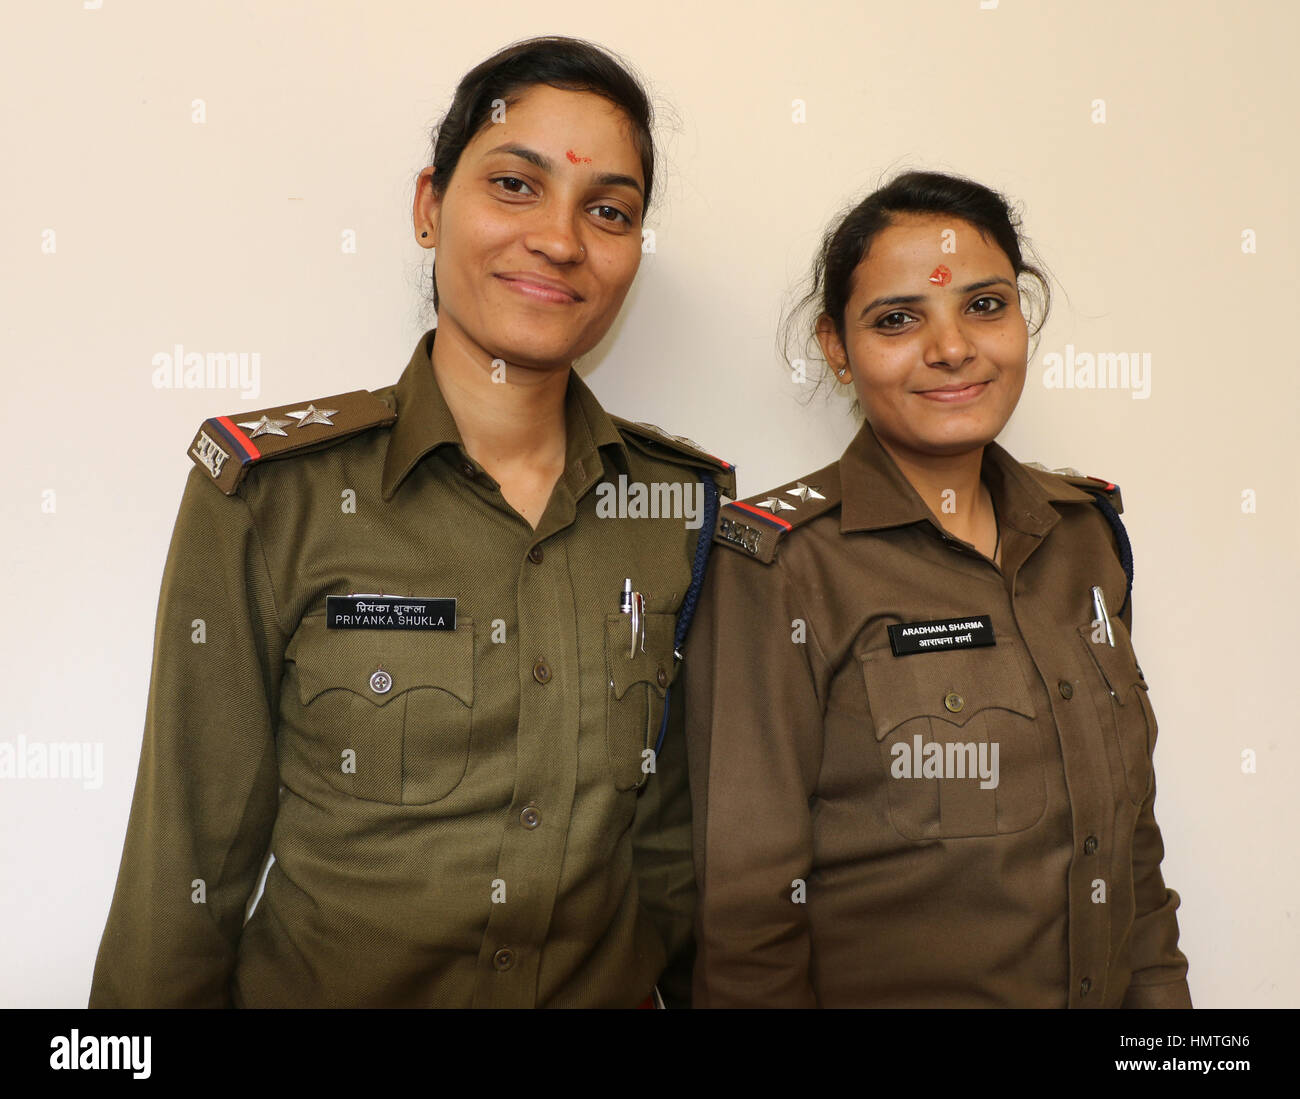 Two lady police officers posing with a sweet smile. Stock Photo